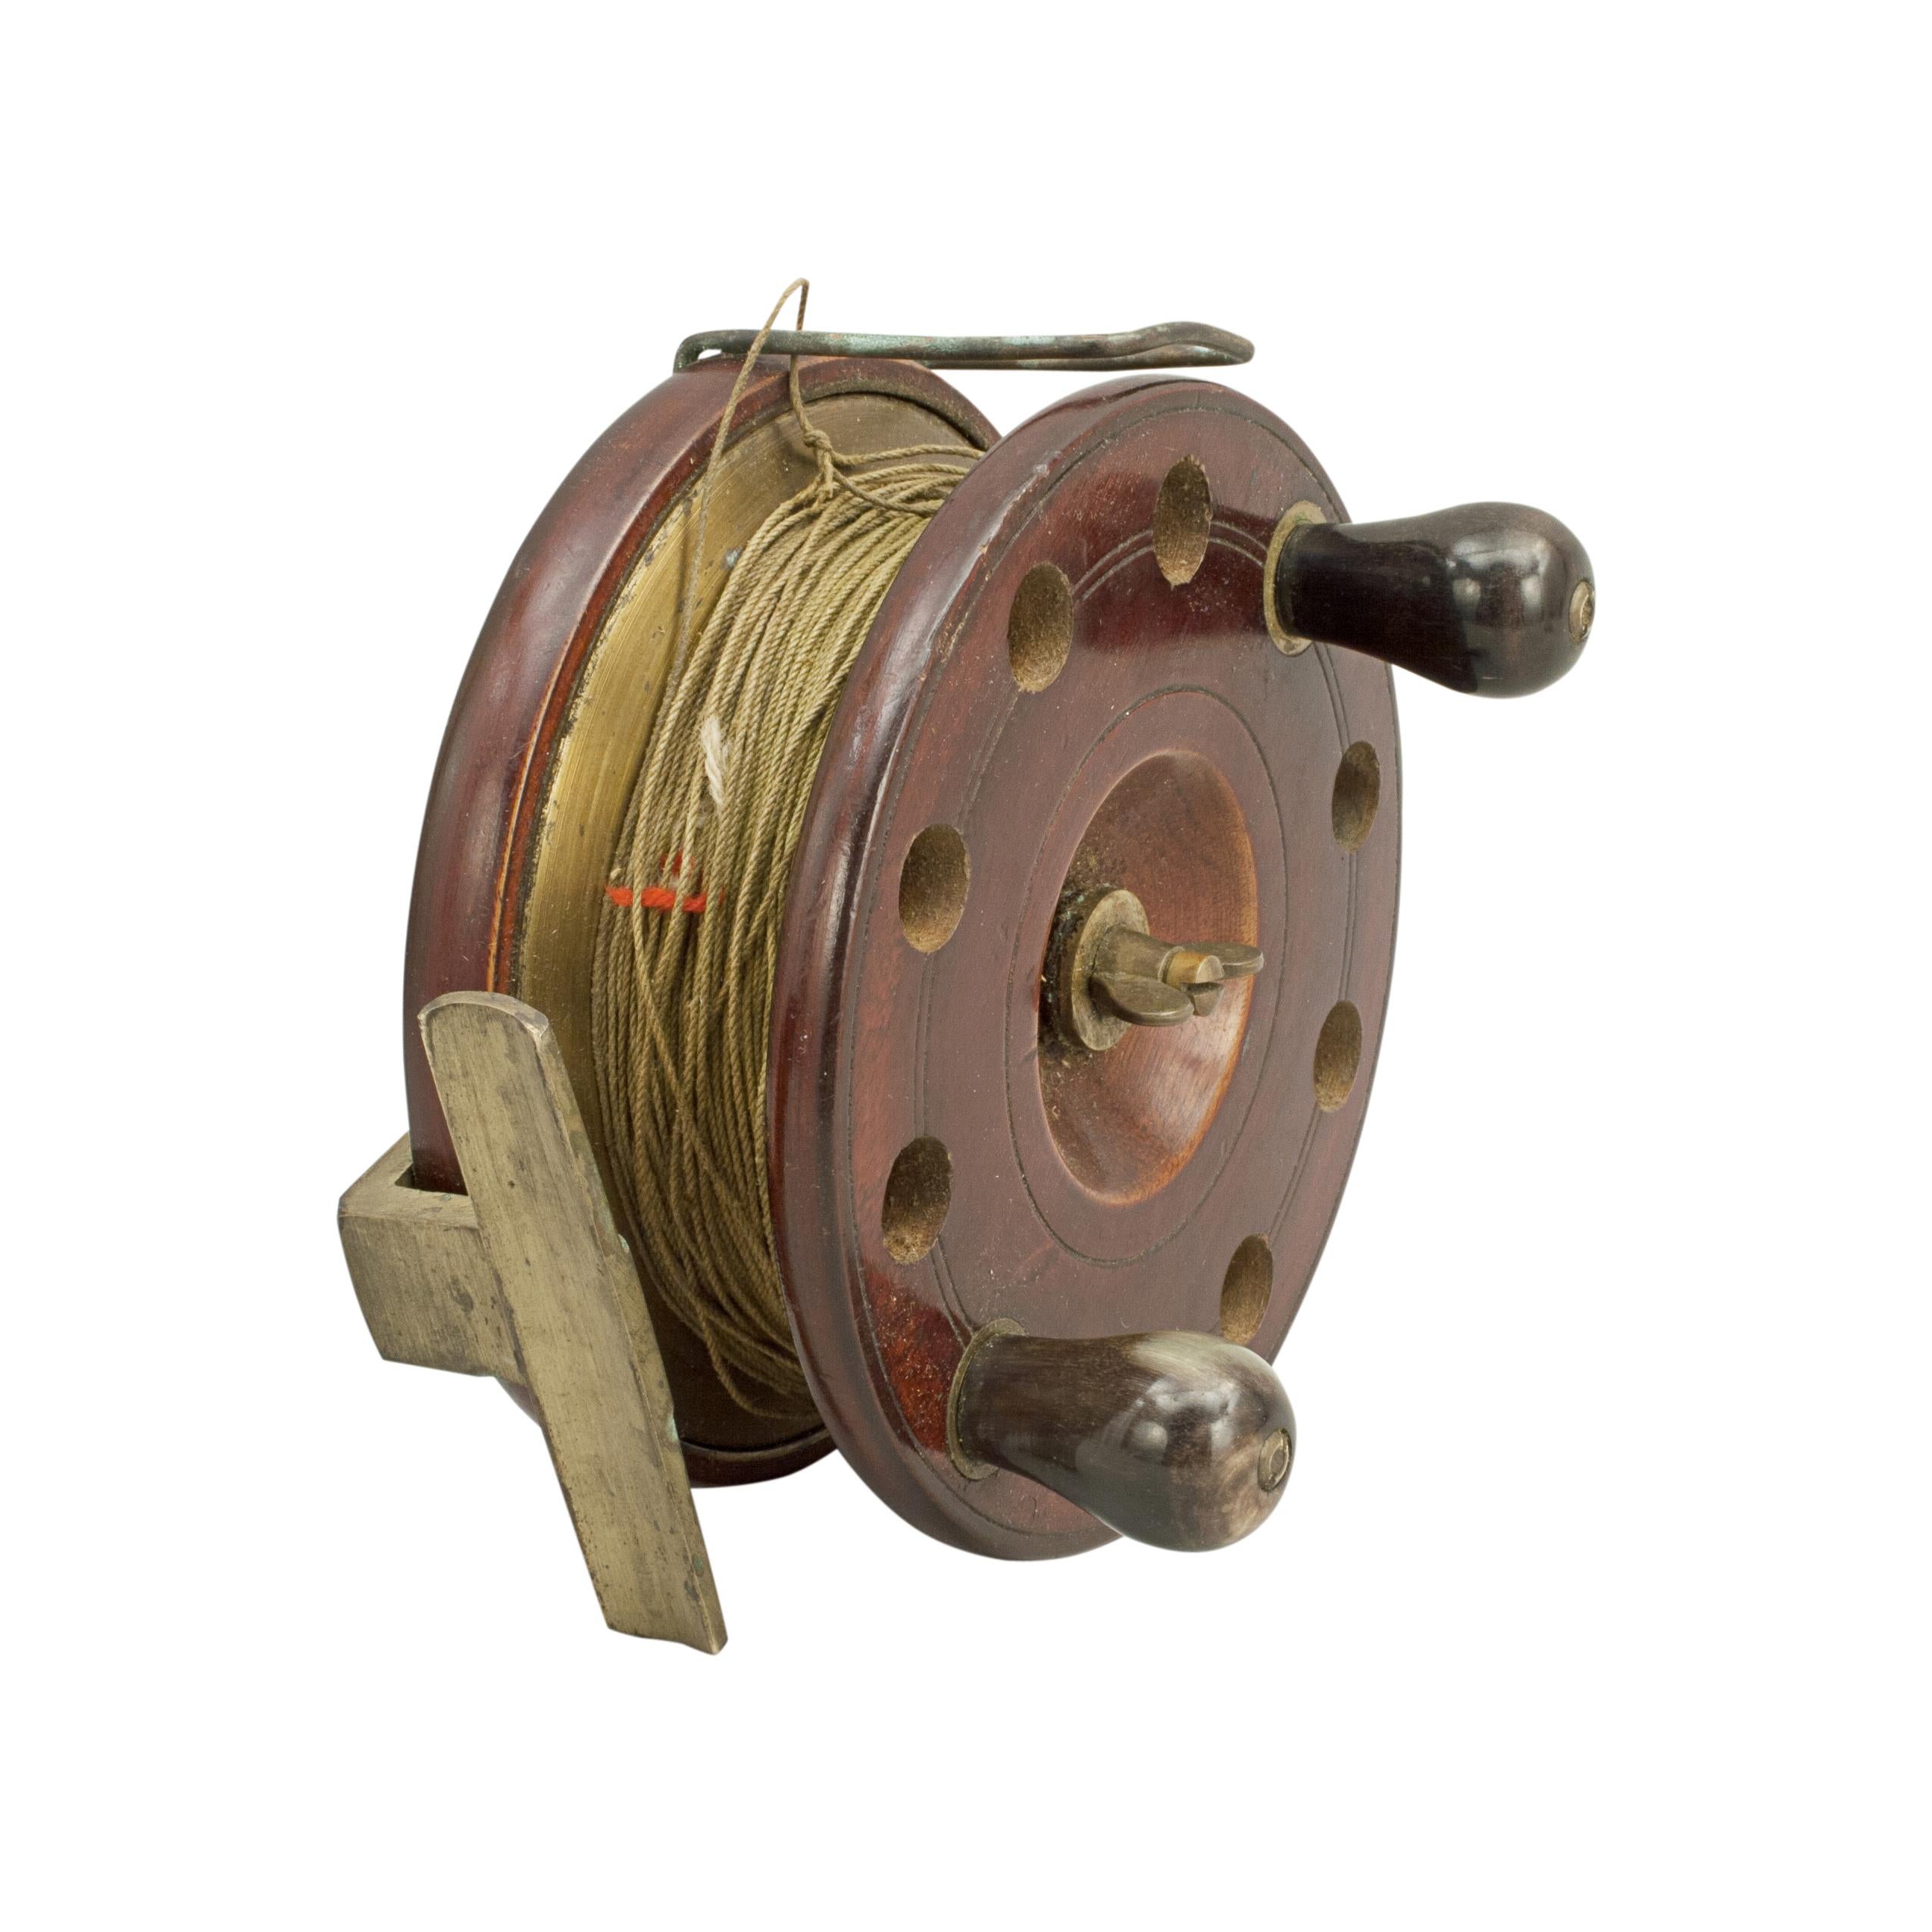 Vintage wooden fishing reel.
A fantastic centre pin Starback Neptune fishing reel. The front plate with cut out holes and two horn handles. The walnut reel with optional check, brass back plate, central tension screw and line guard.